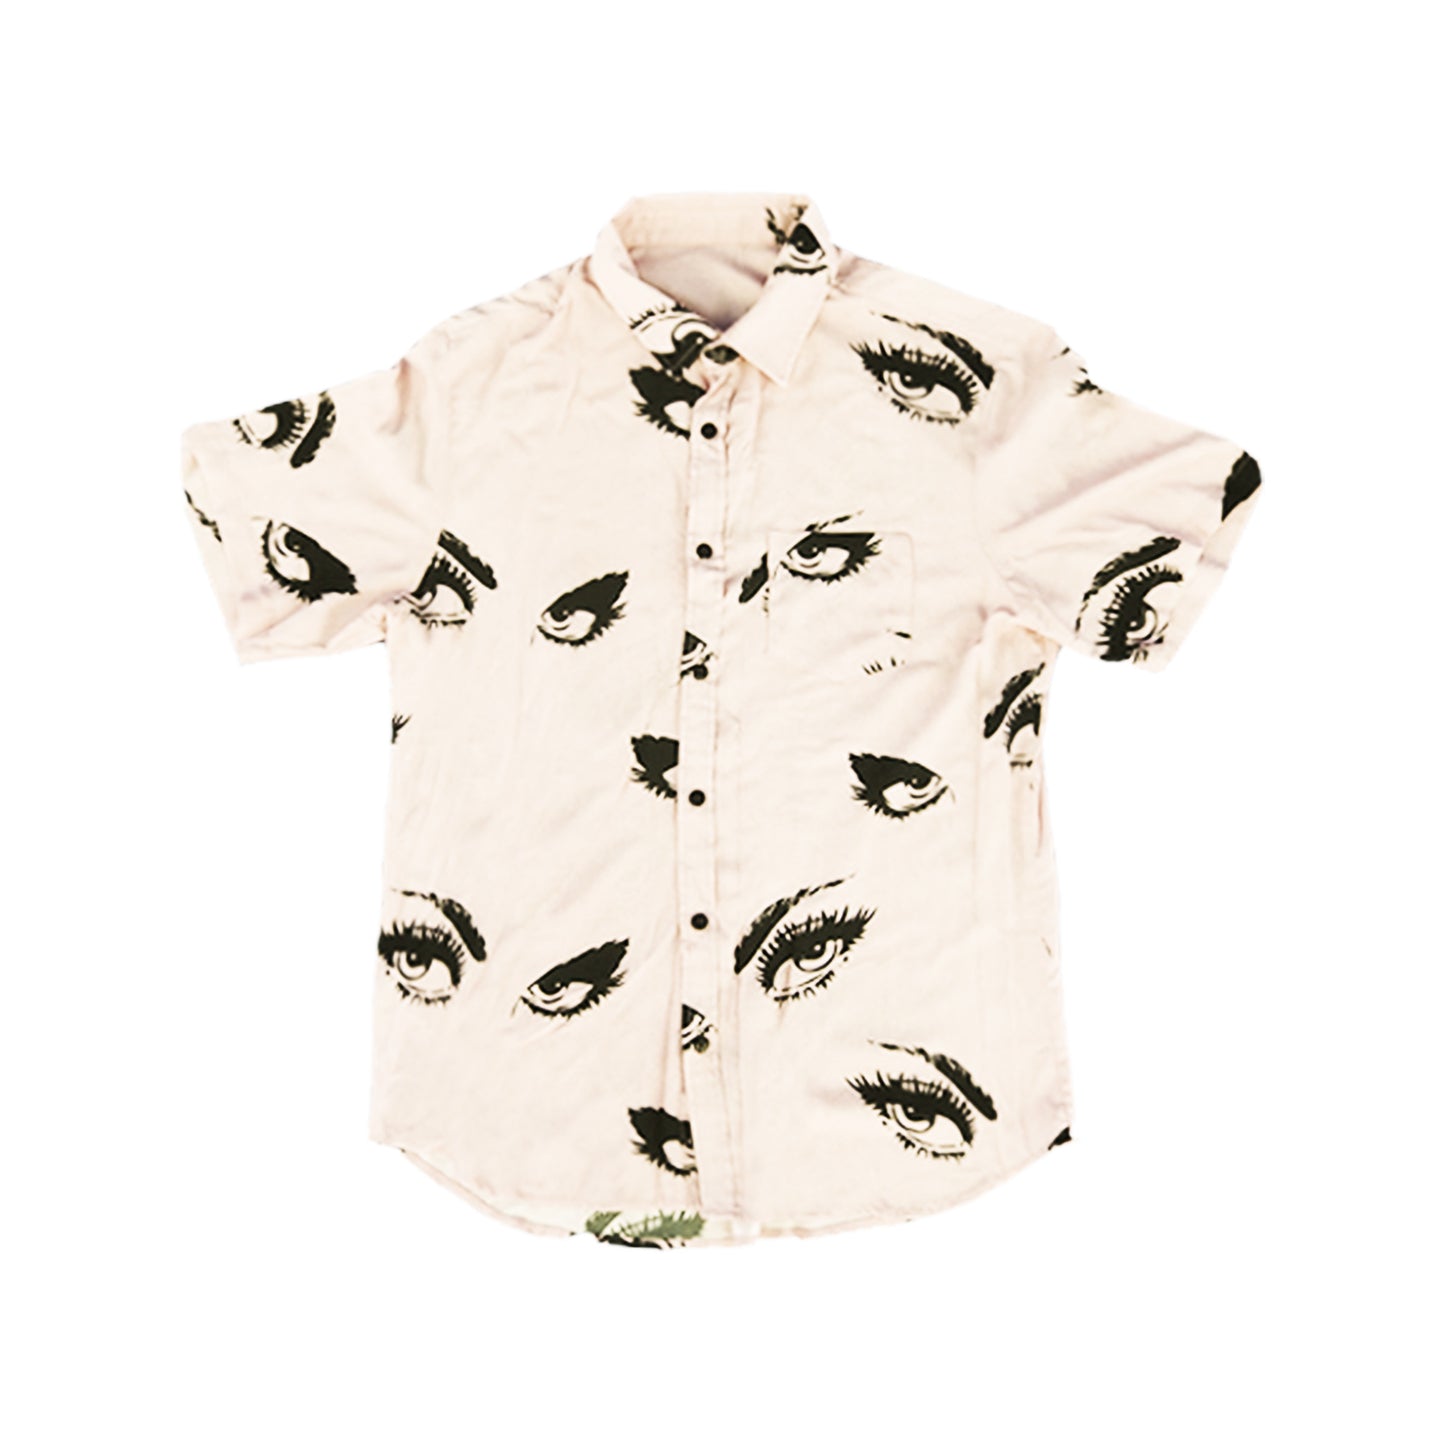 EYES BUTTON-UP SHIRT by MENACE